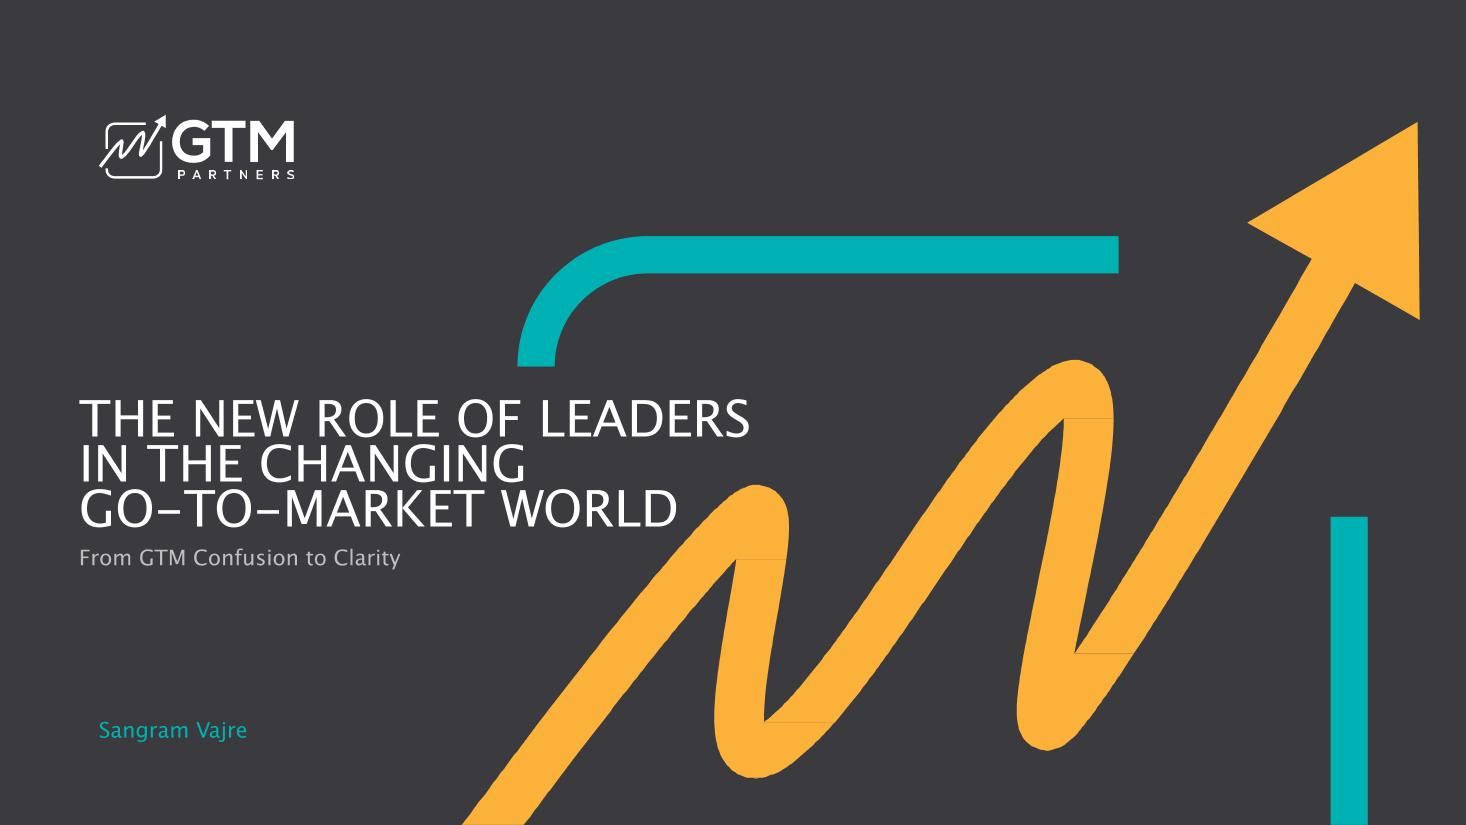 The New Role of Leaders in the changing Go to Market World